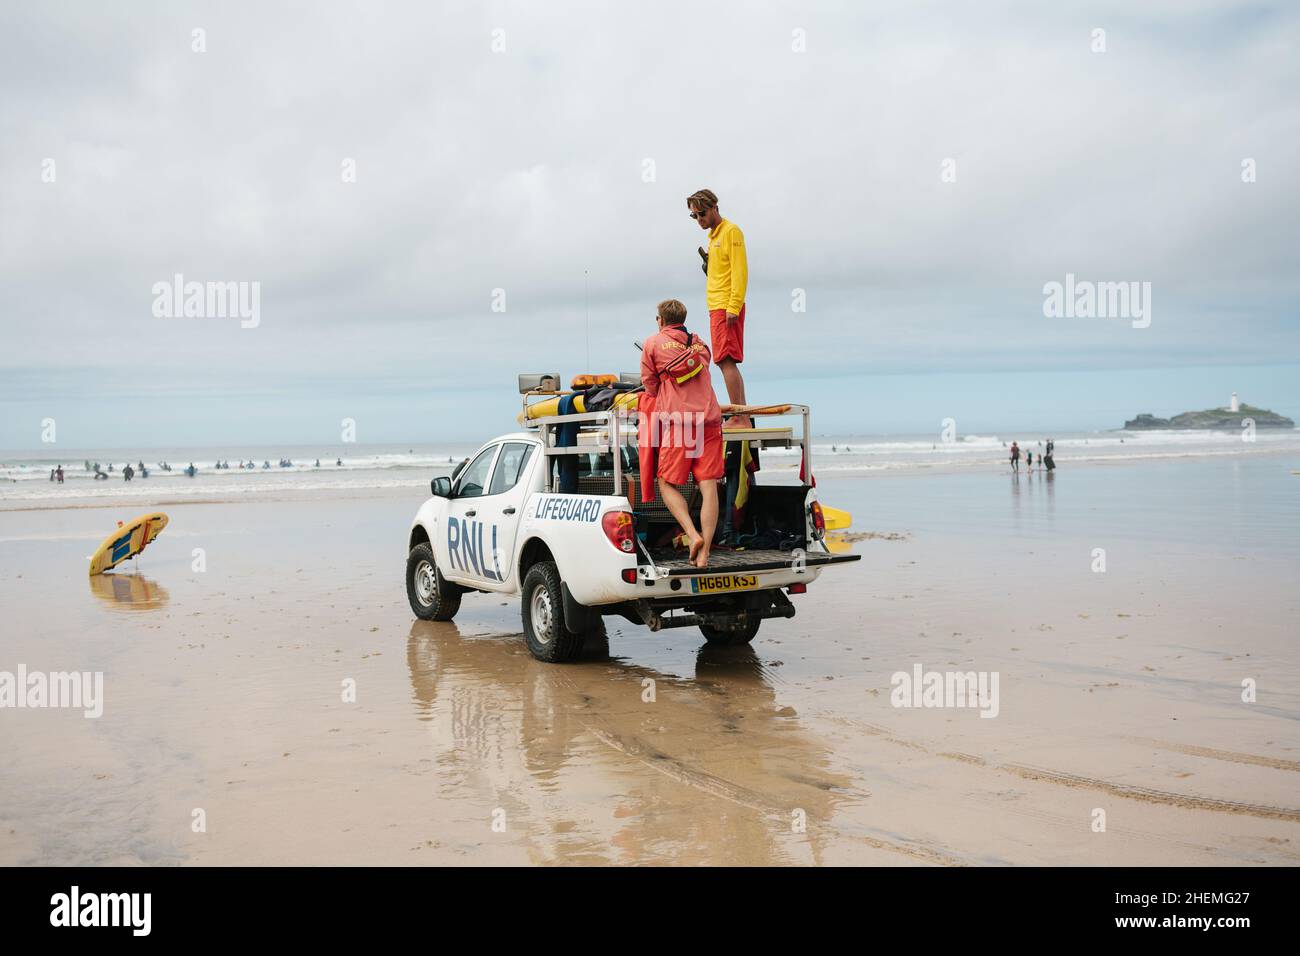 RNLI Lifeguards lookout for bathers and surfers safety from the high vantage point of their 4x4 on the beach at Gwithian near St Ives, Cornwall. Stock Photo